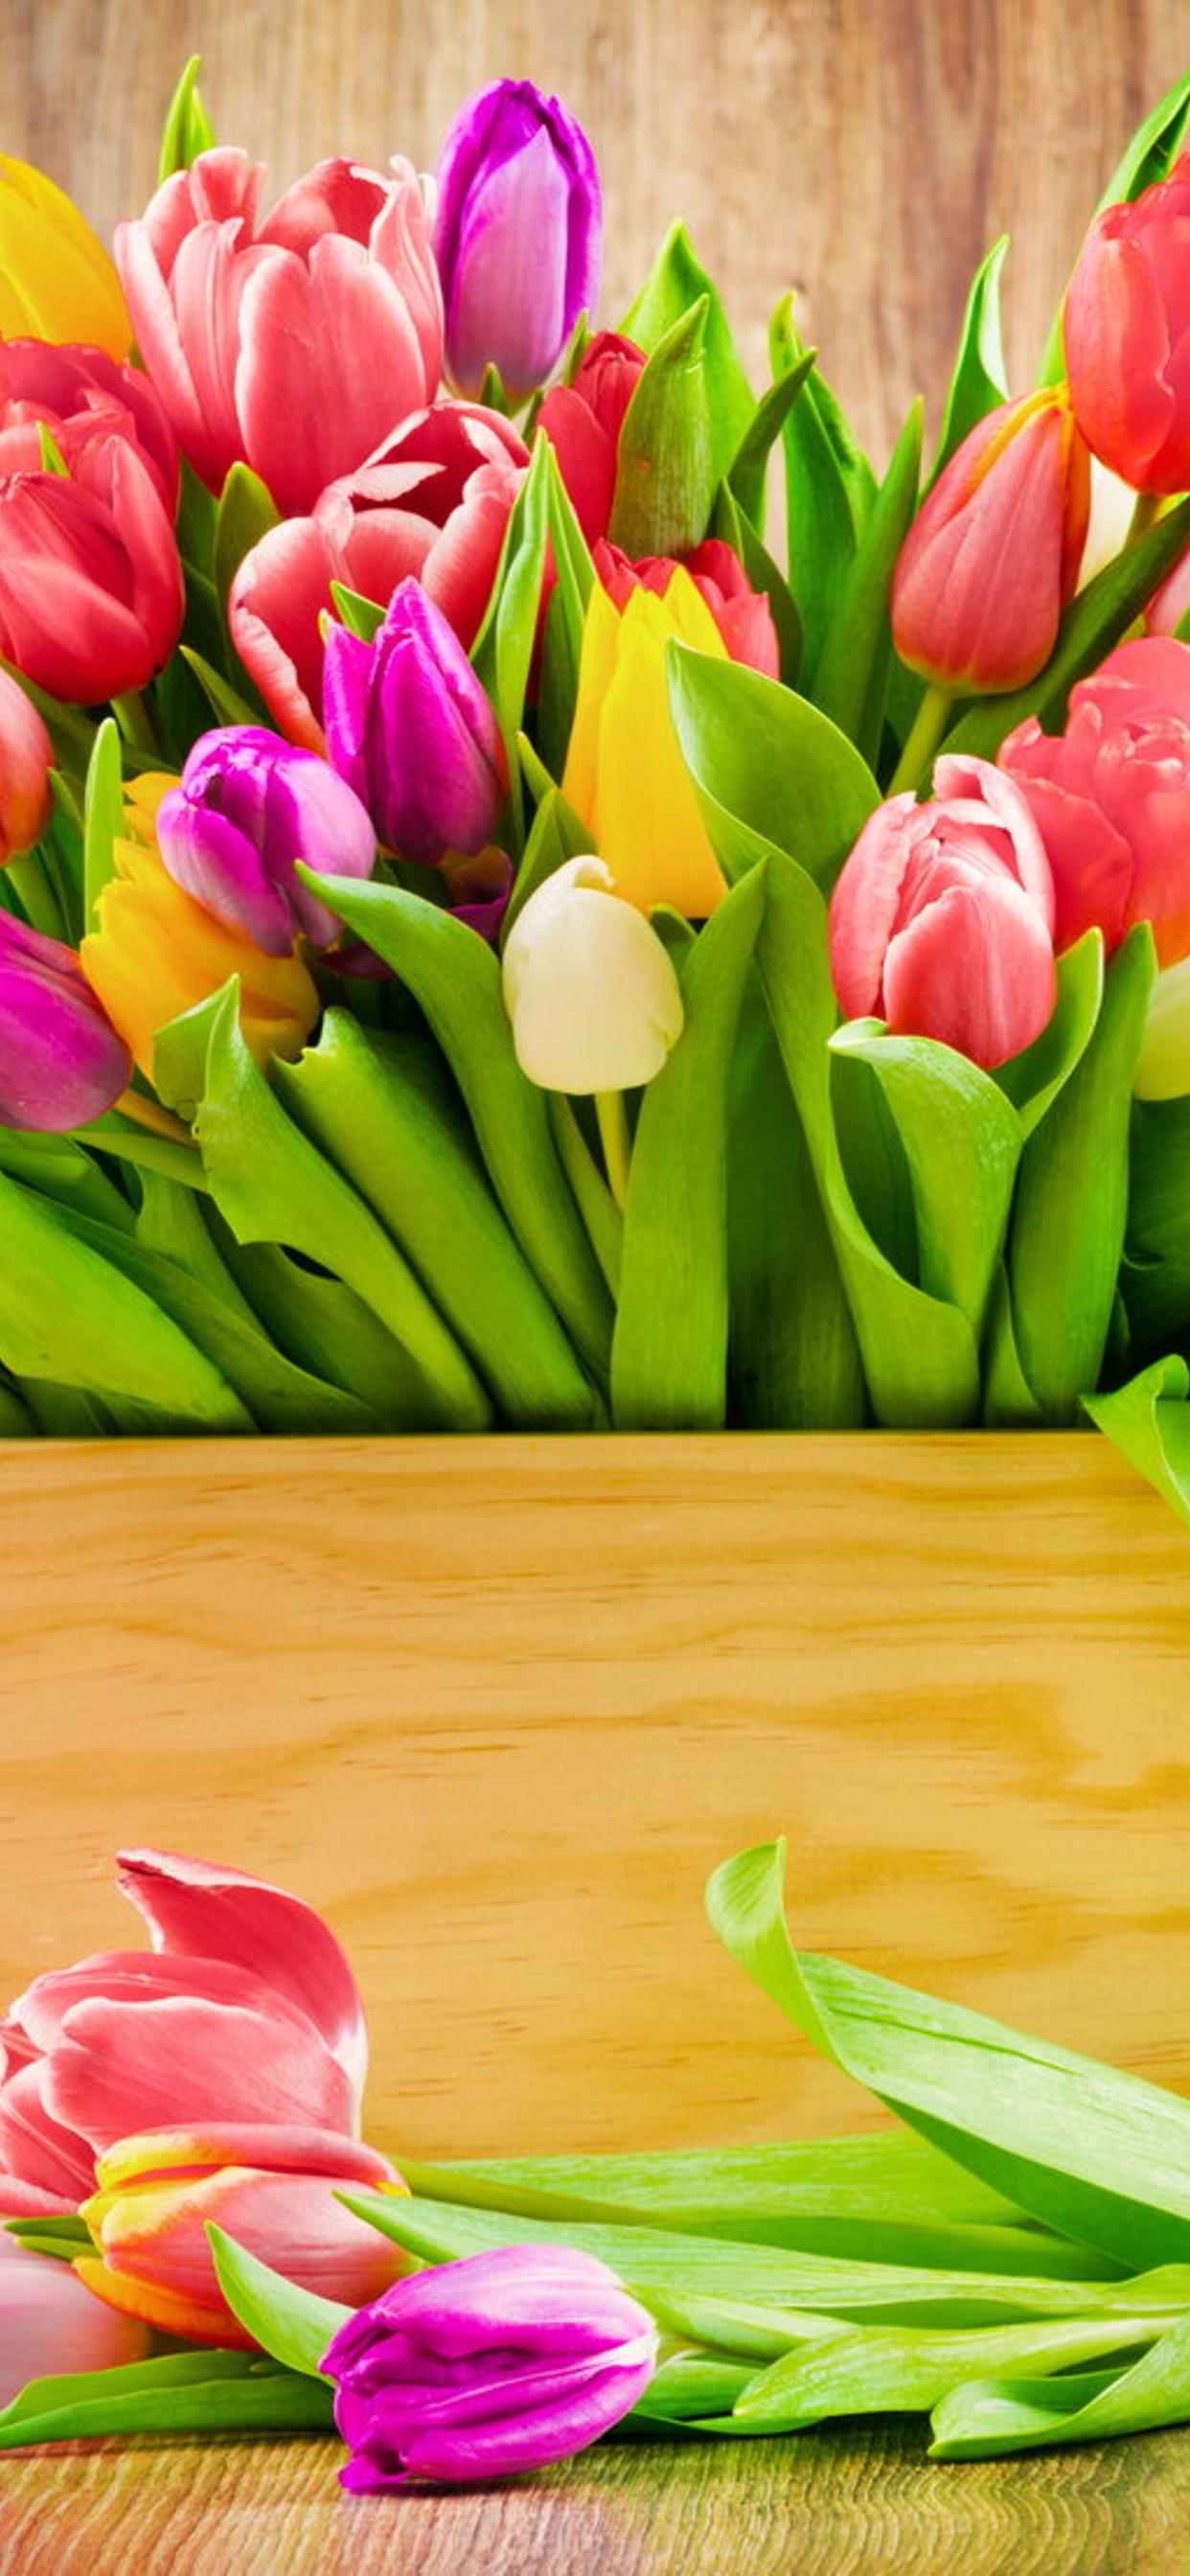 Wonderful bouquet of colorful tulips - HD wallpaper